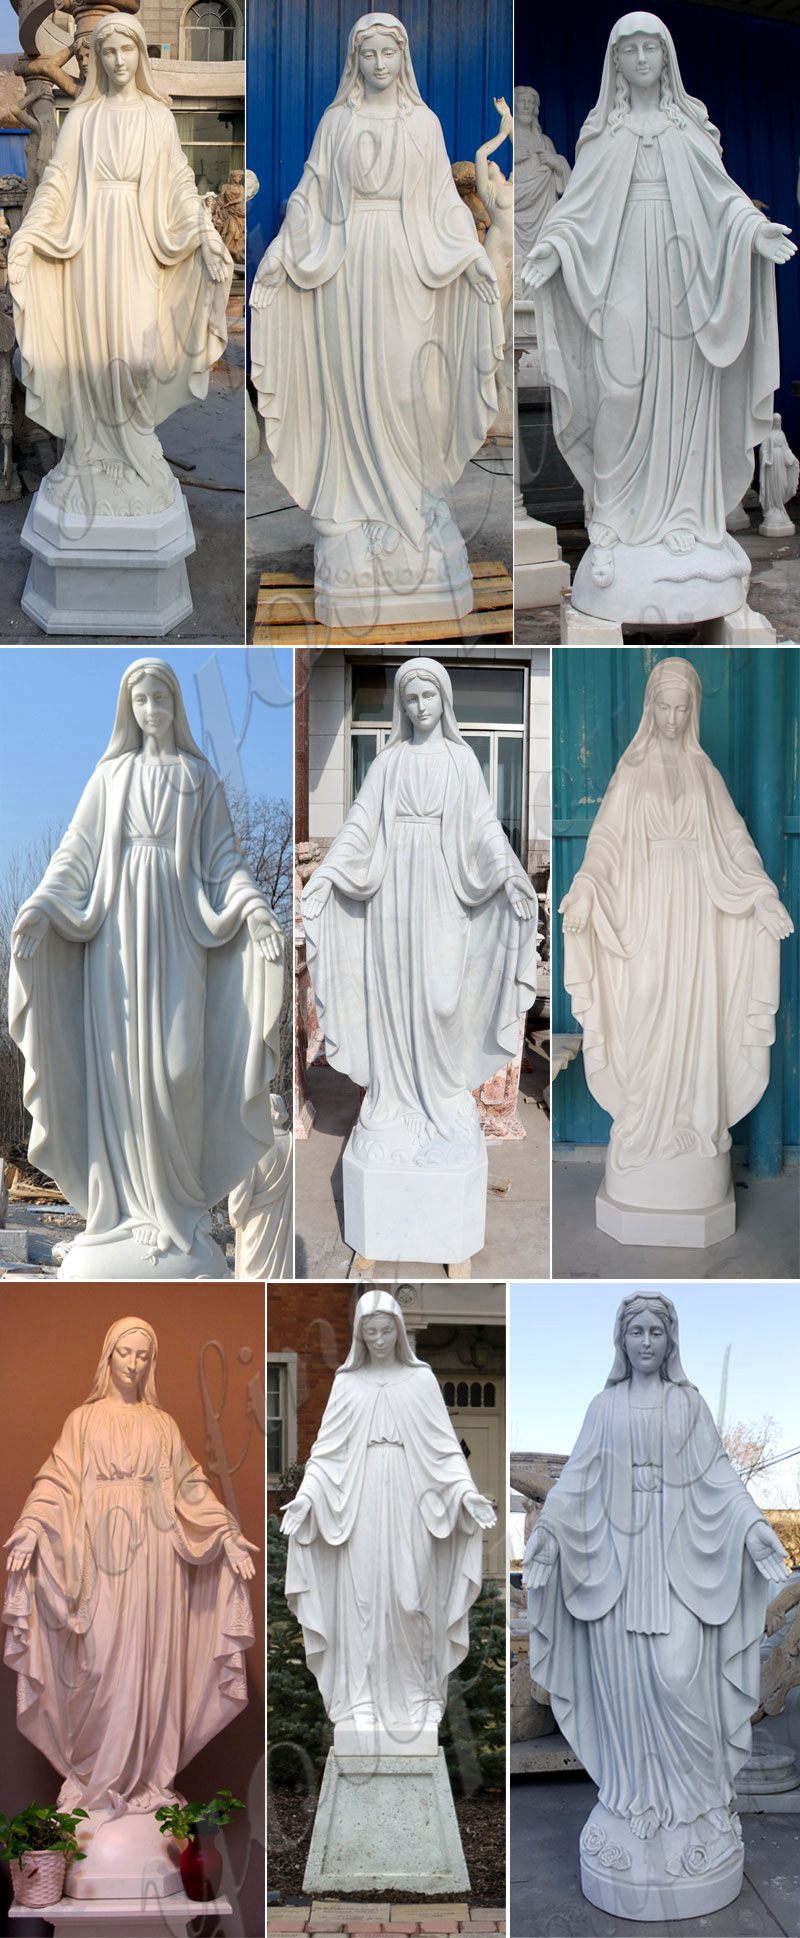 Life Size Outdoor Catholic Virgin Mary Marble Statue for Sale More Designs